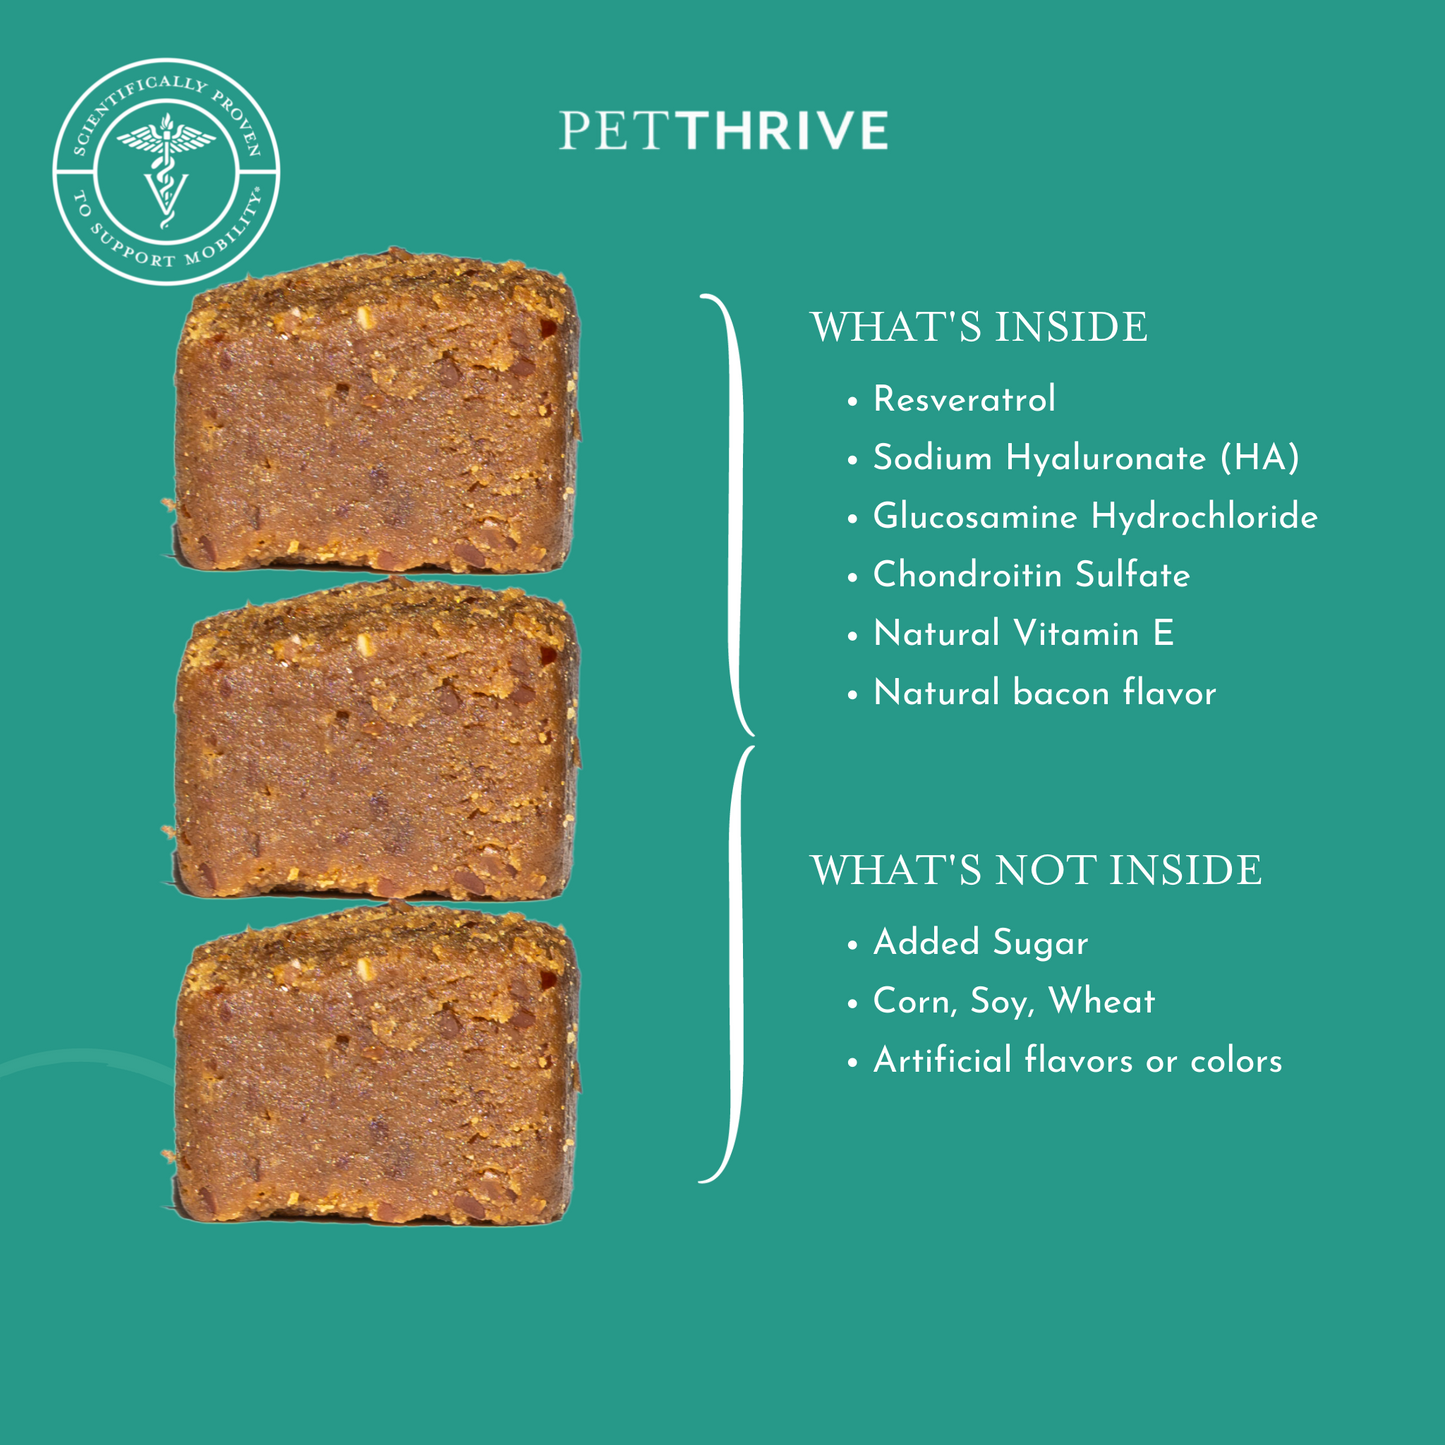 
                  
                    Petthrive Soft Chews With Resveratrol - Large Breed
                  
                